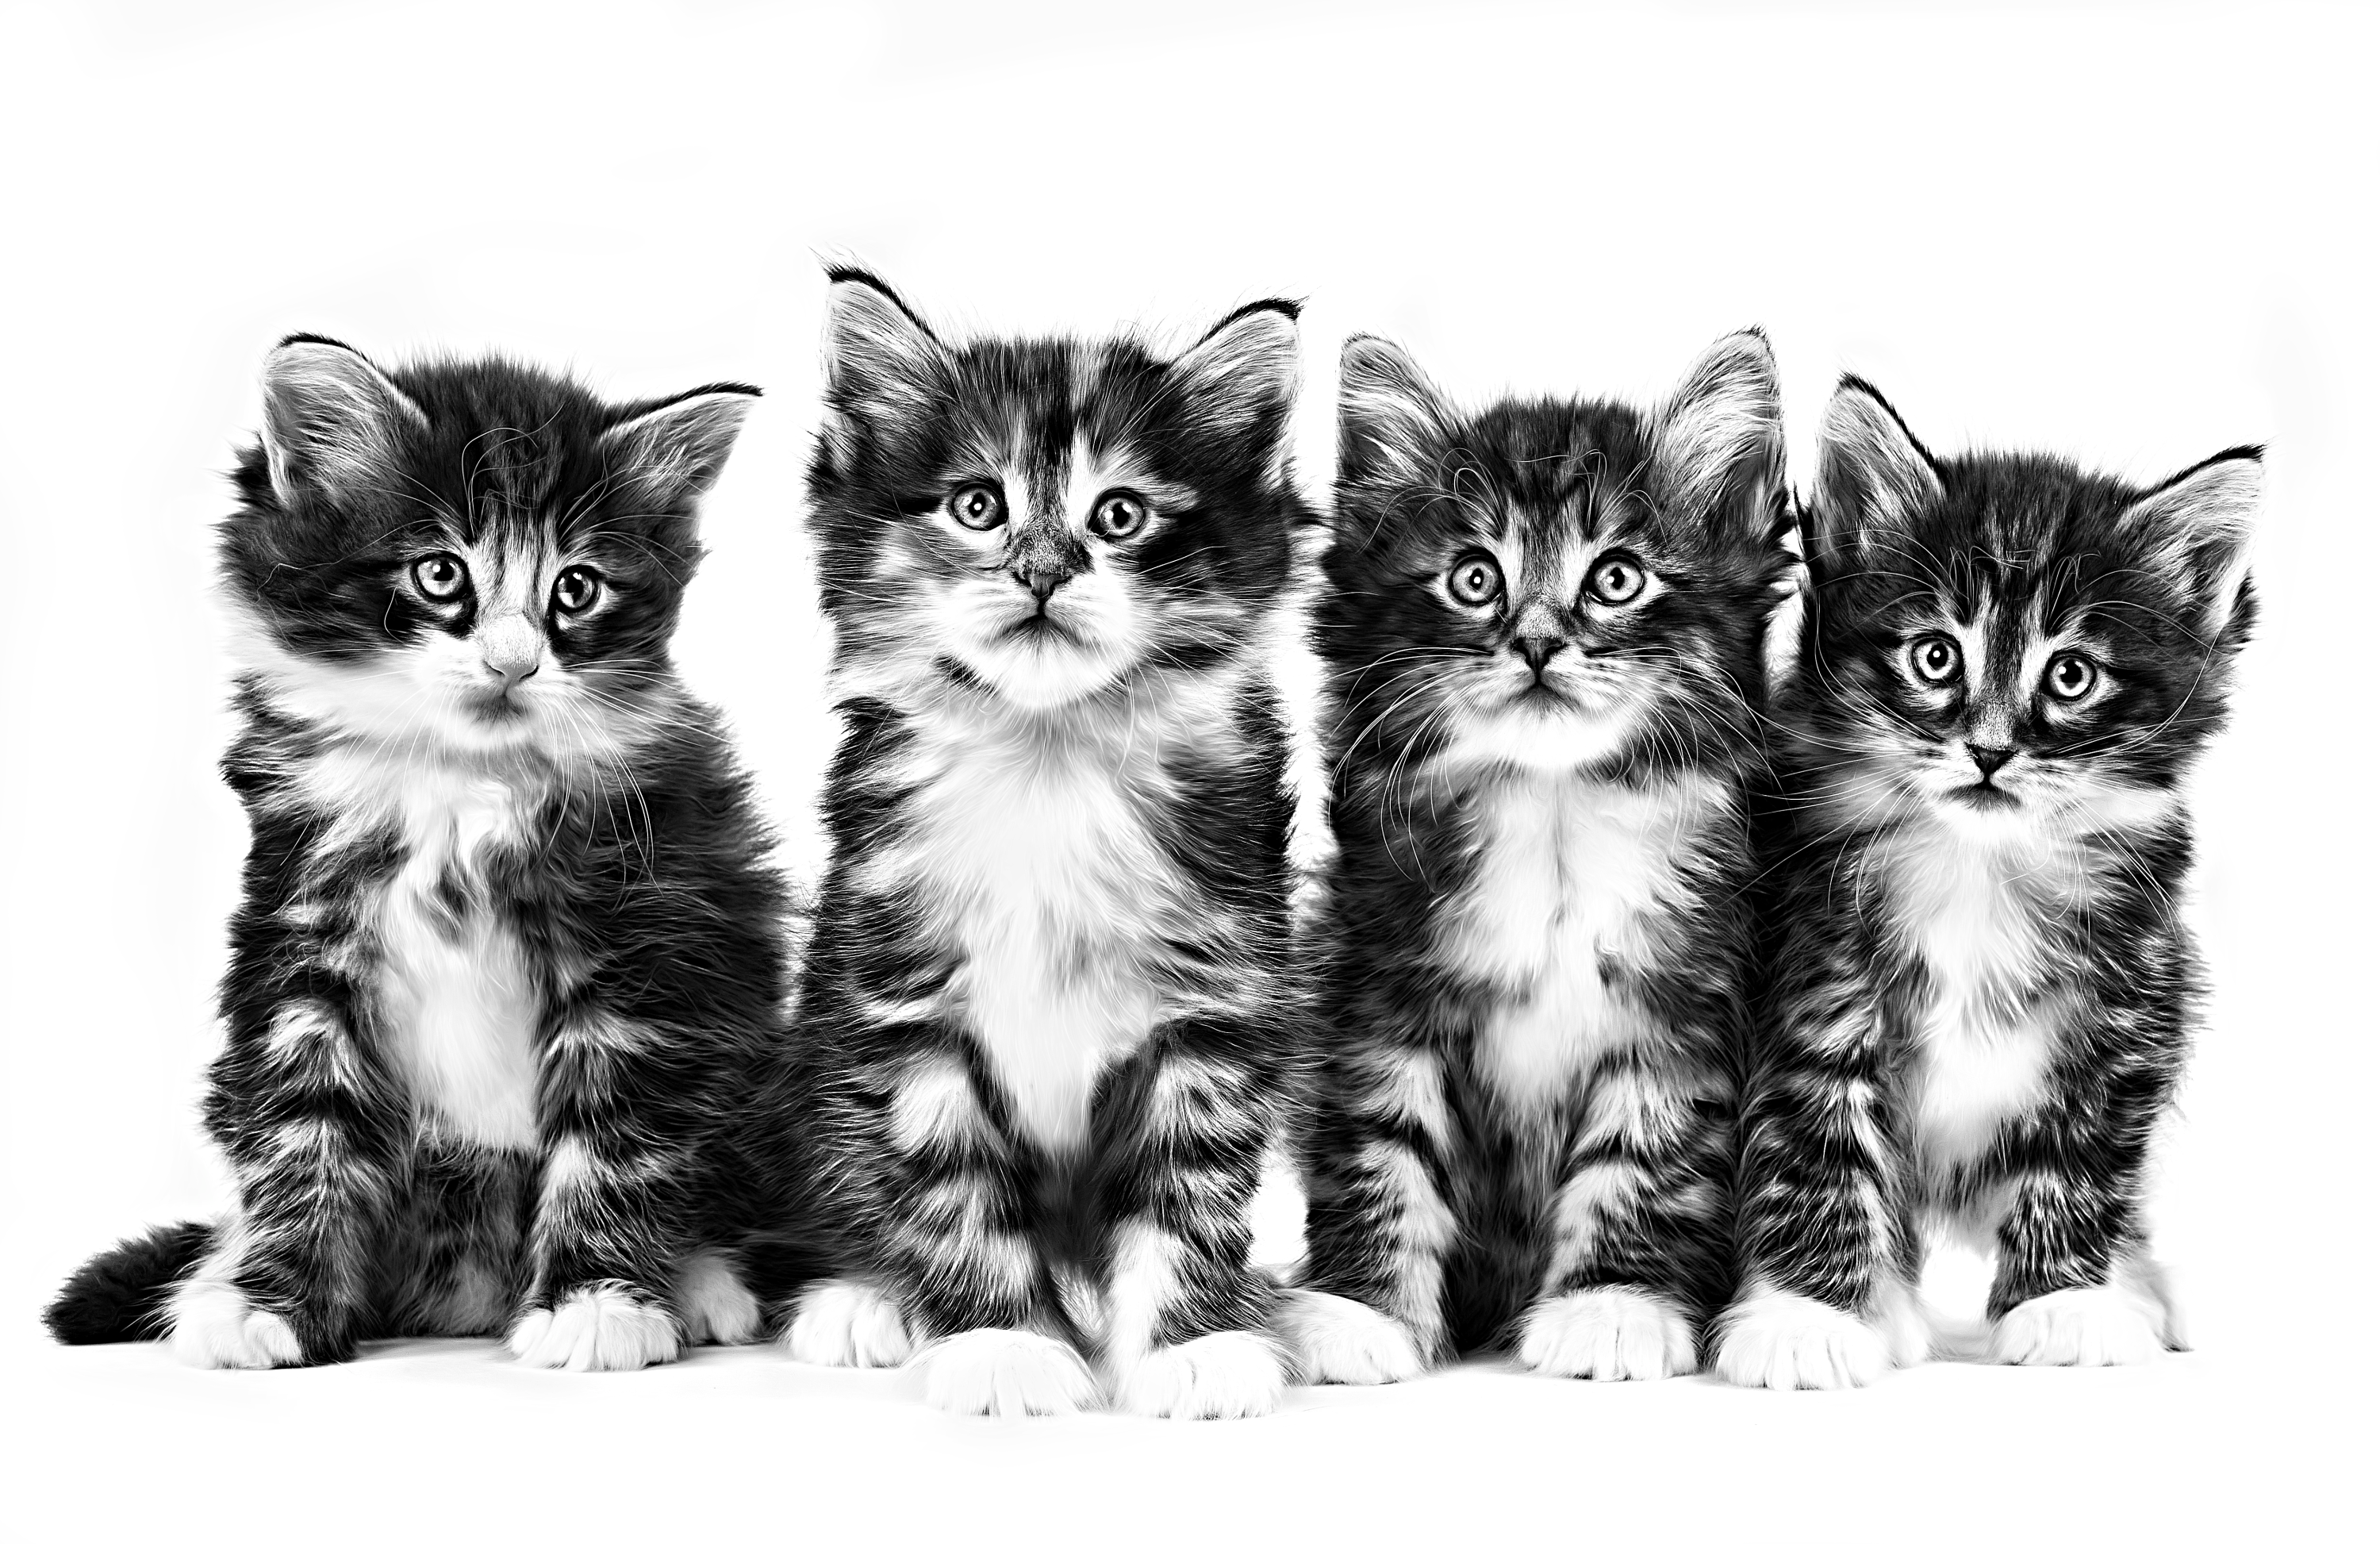 Norwegian Forest Cat kittens sitting together in black and white